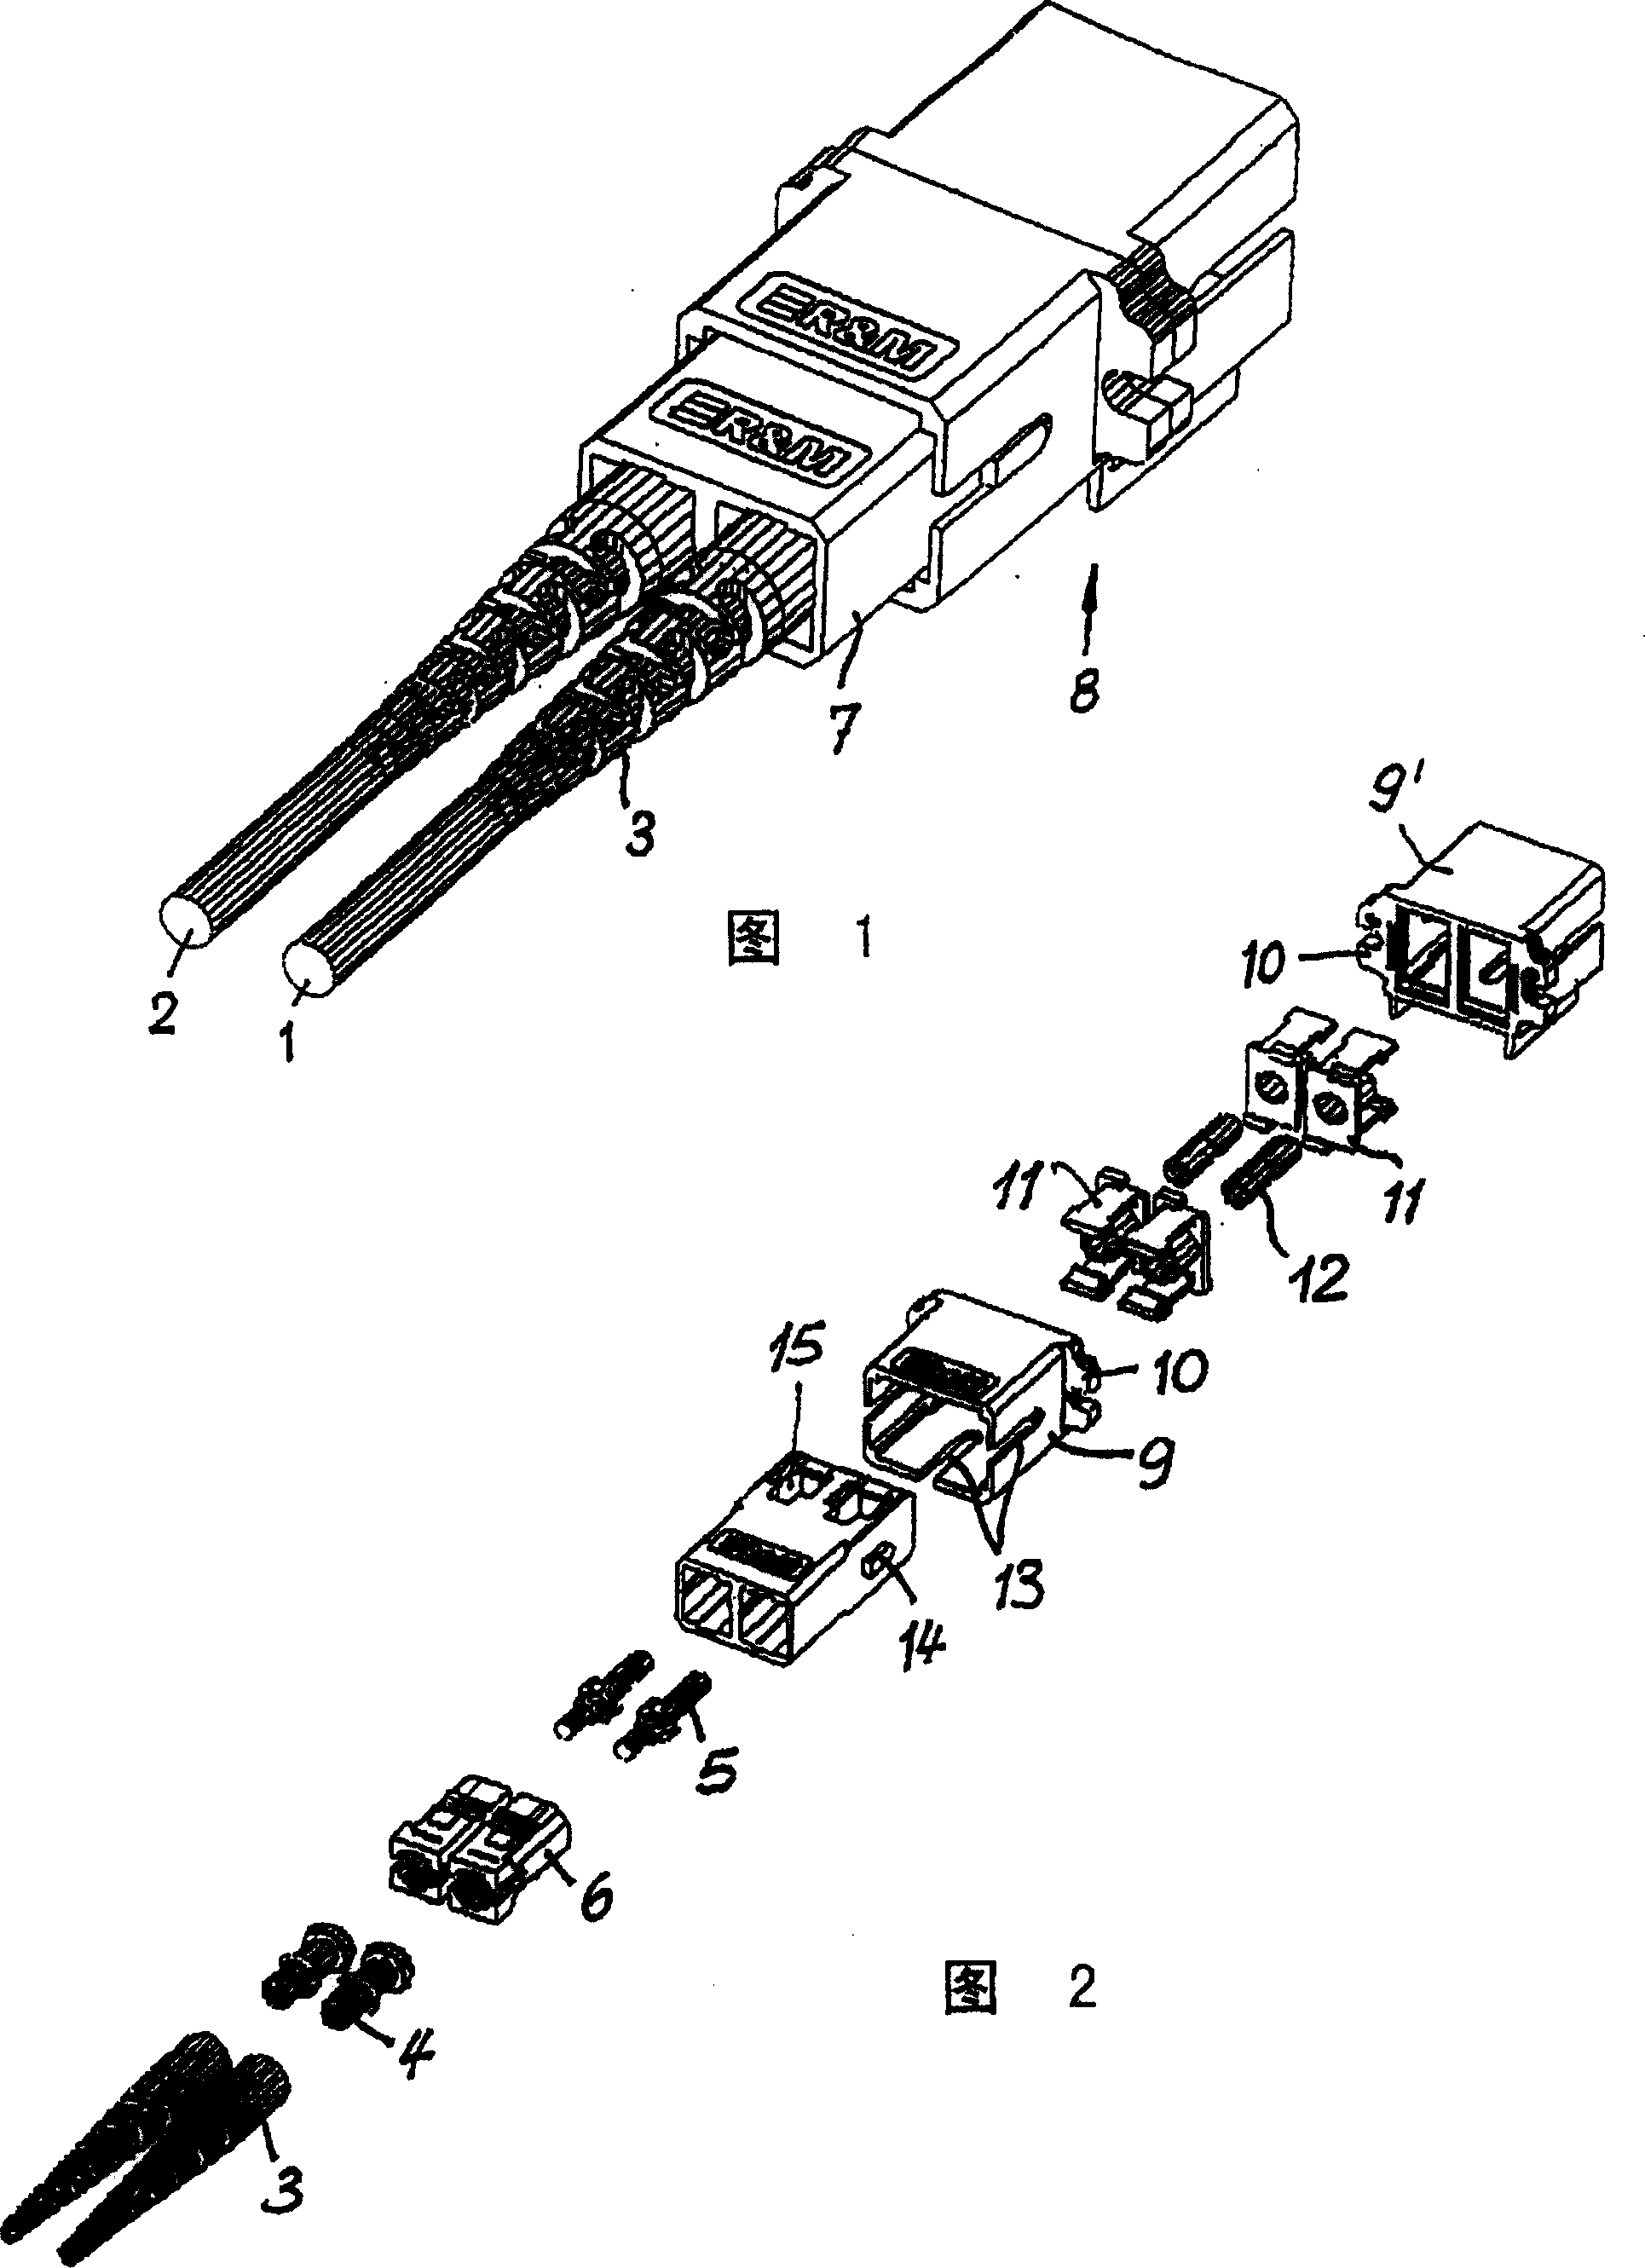 Contact connector system for light waveguides